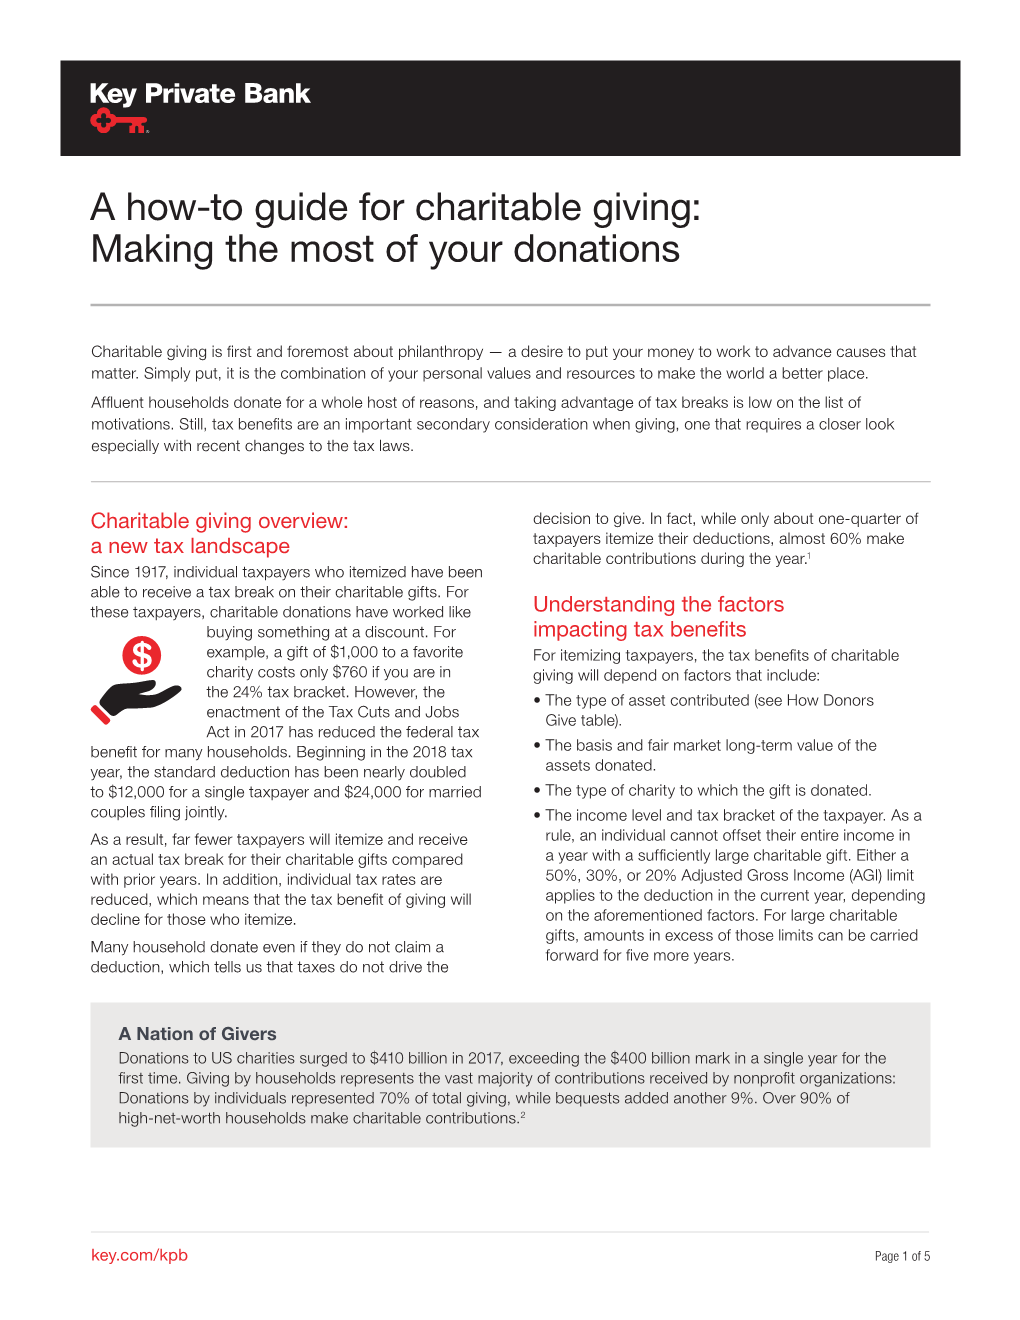 A How-To Guide for Charitable Giving: Making the Most of Your Donations